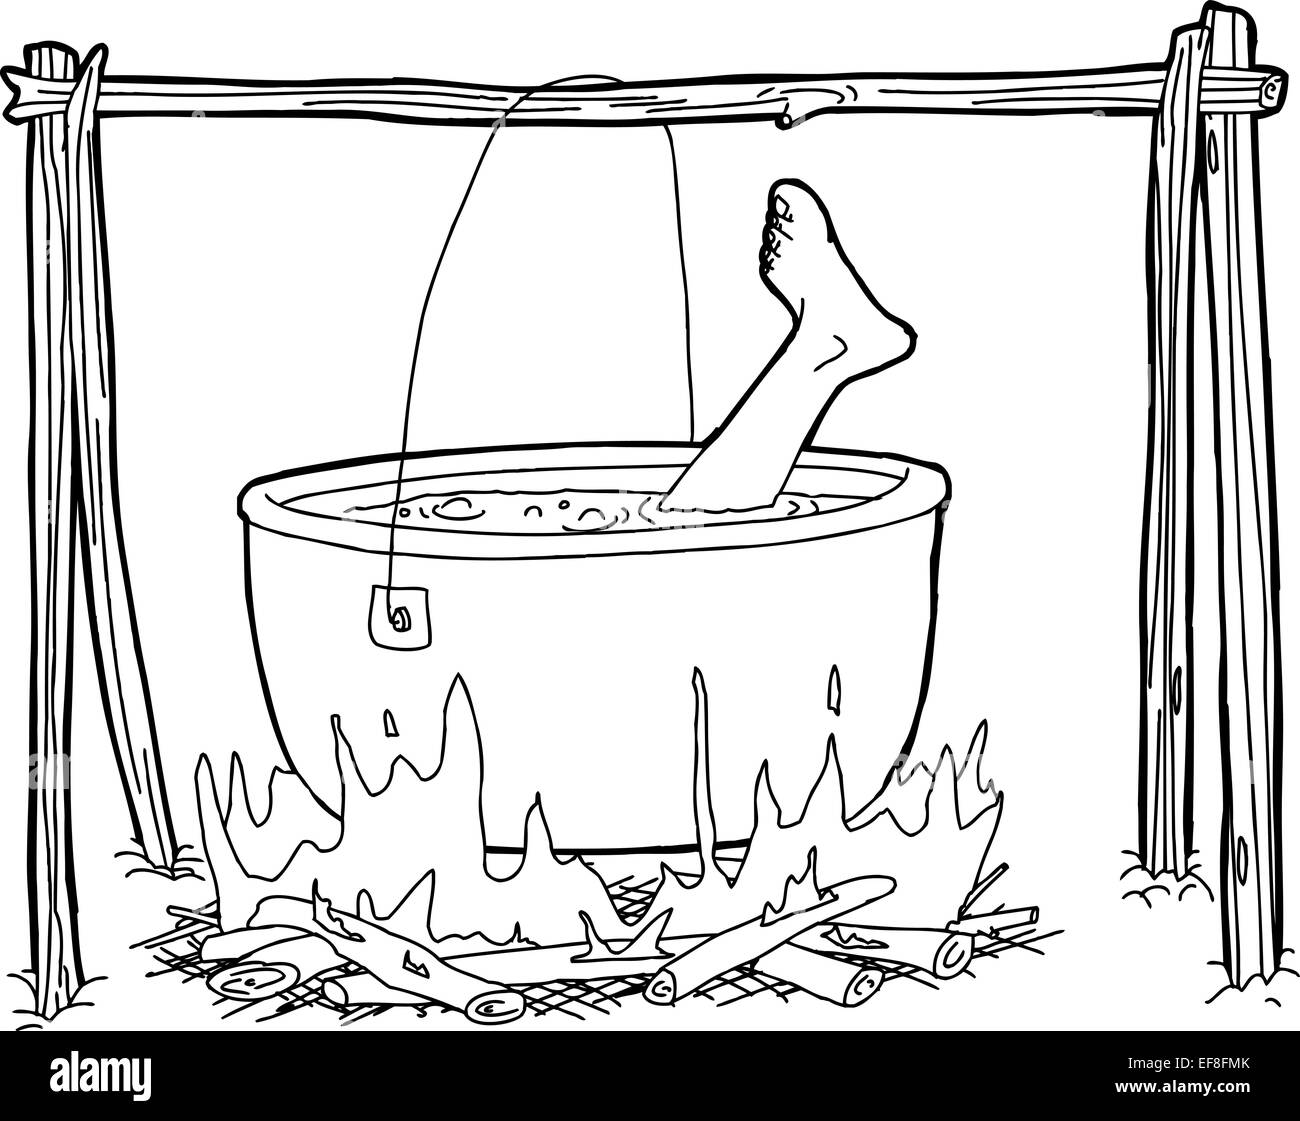 Outline cartoon of human foot boiling in campfire cauldron Stock Photo